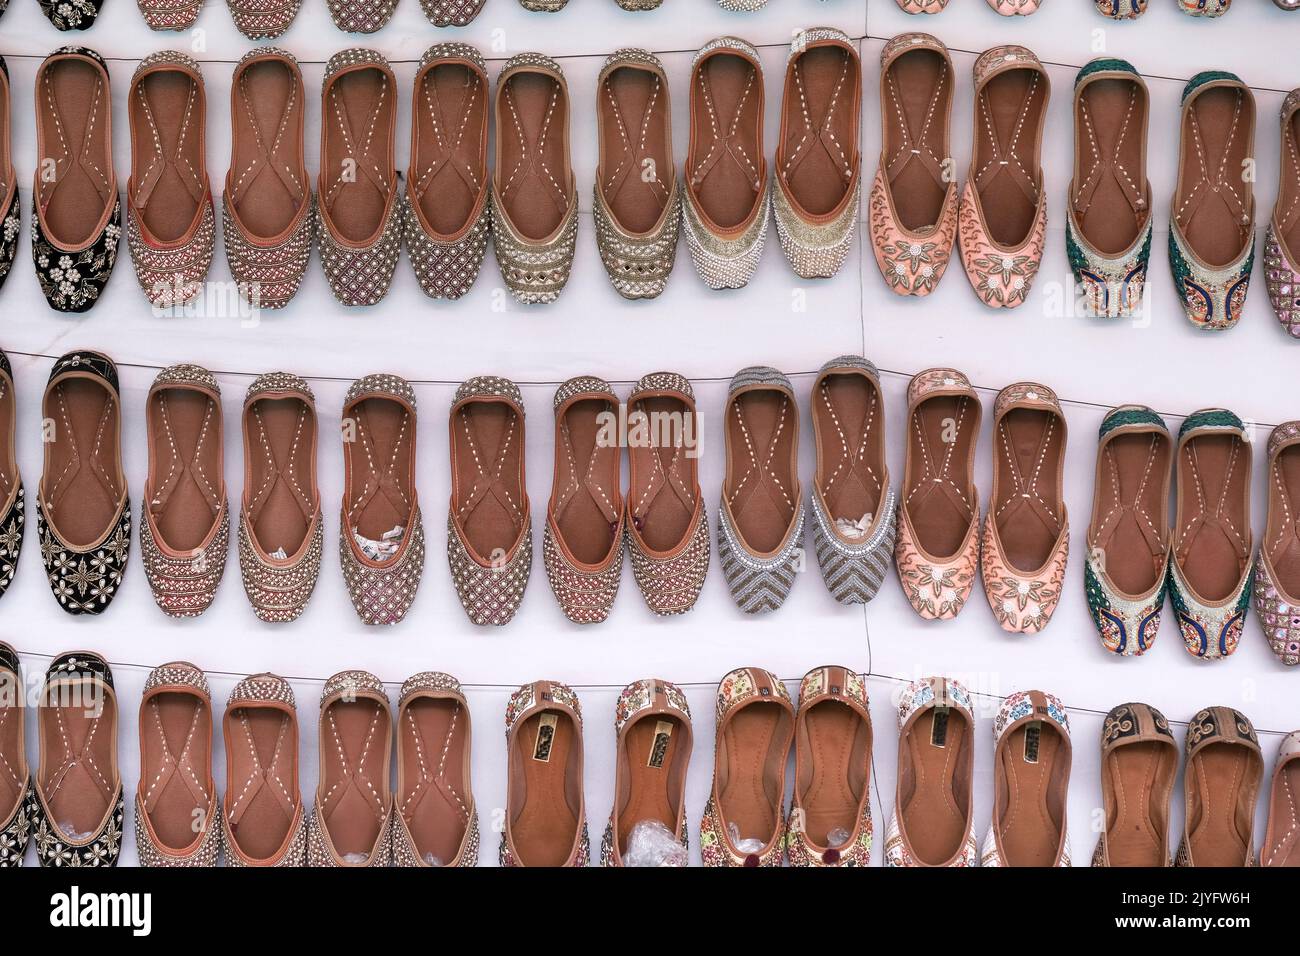 Colorful Handmade chappals (sandals) being sold in an Indian market, Handmade leather slippers, Traditional footwear. Stock Photo